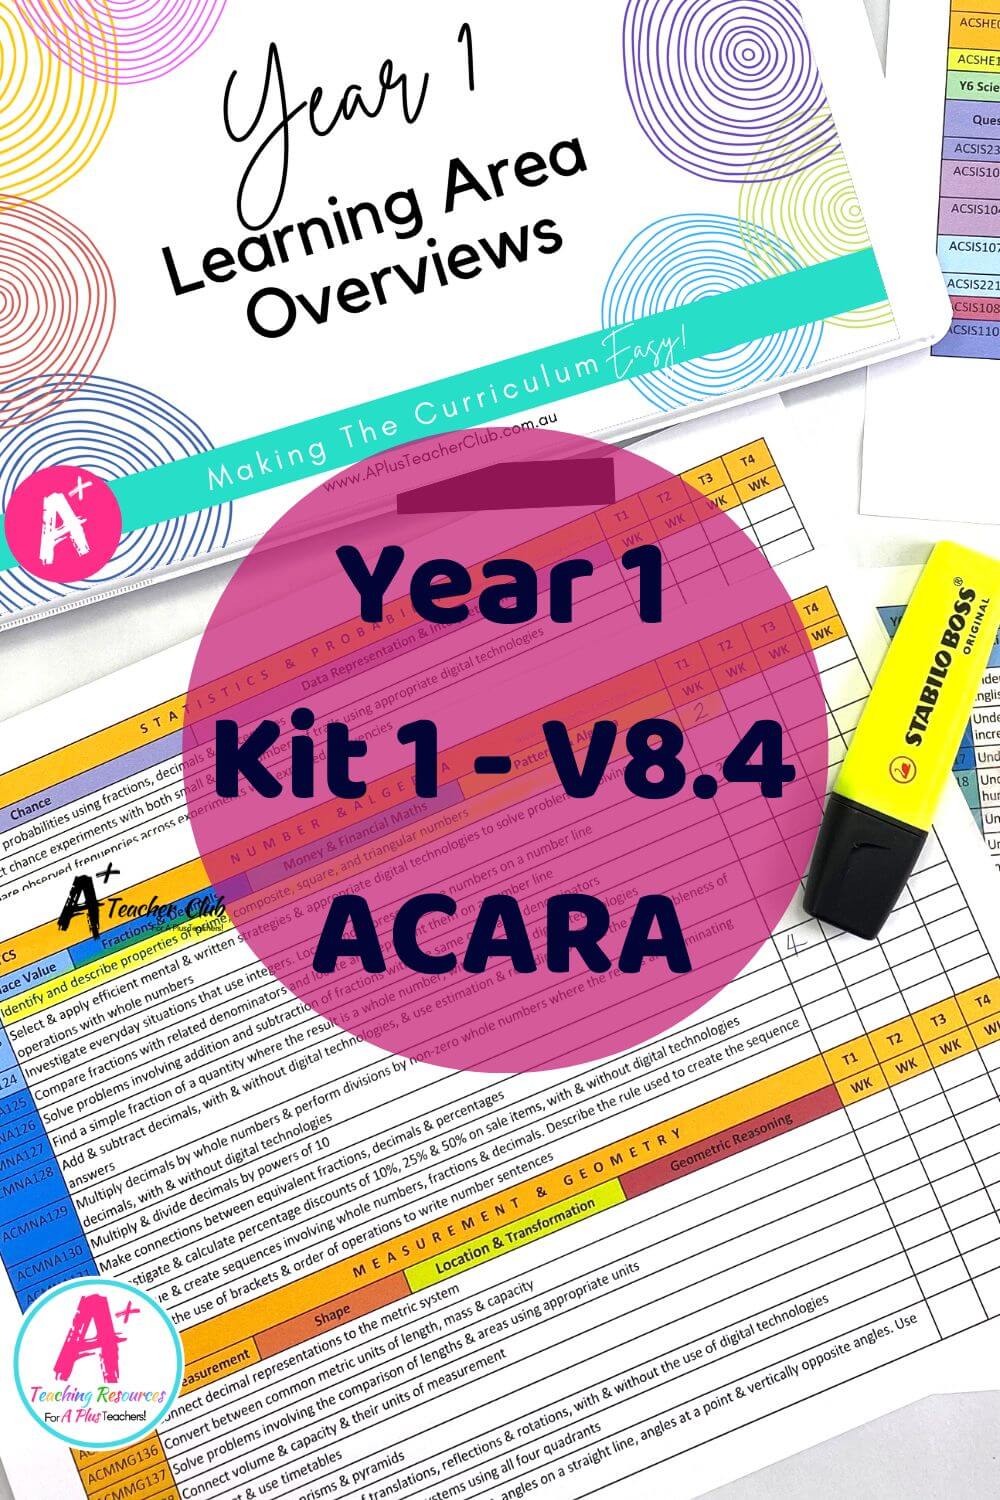 Year 1 Forward Planning Curriculum Overview ACARA V8.4